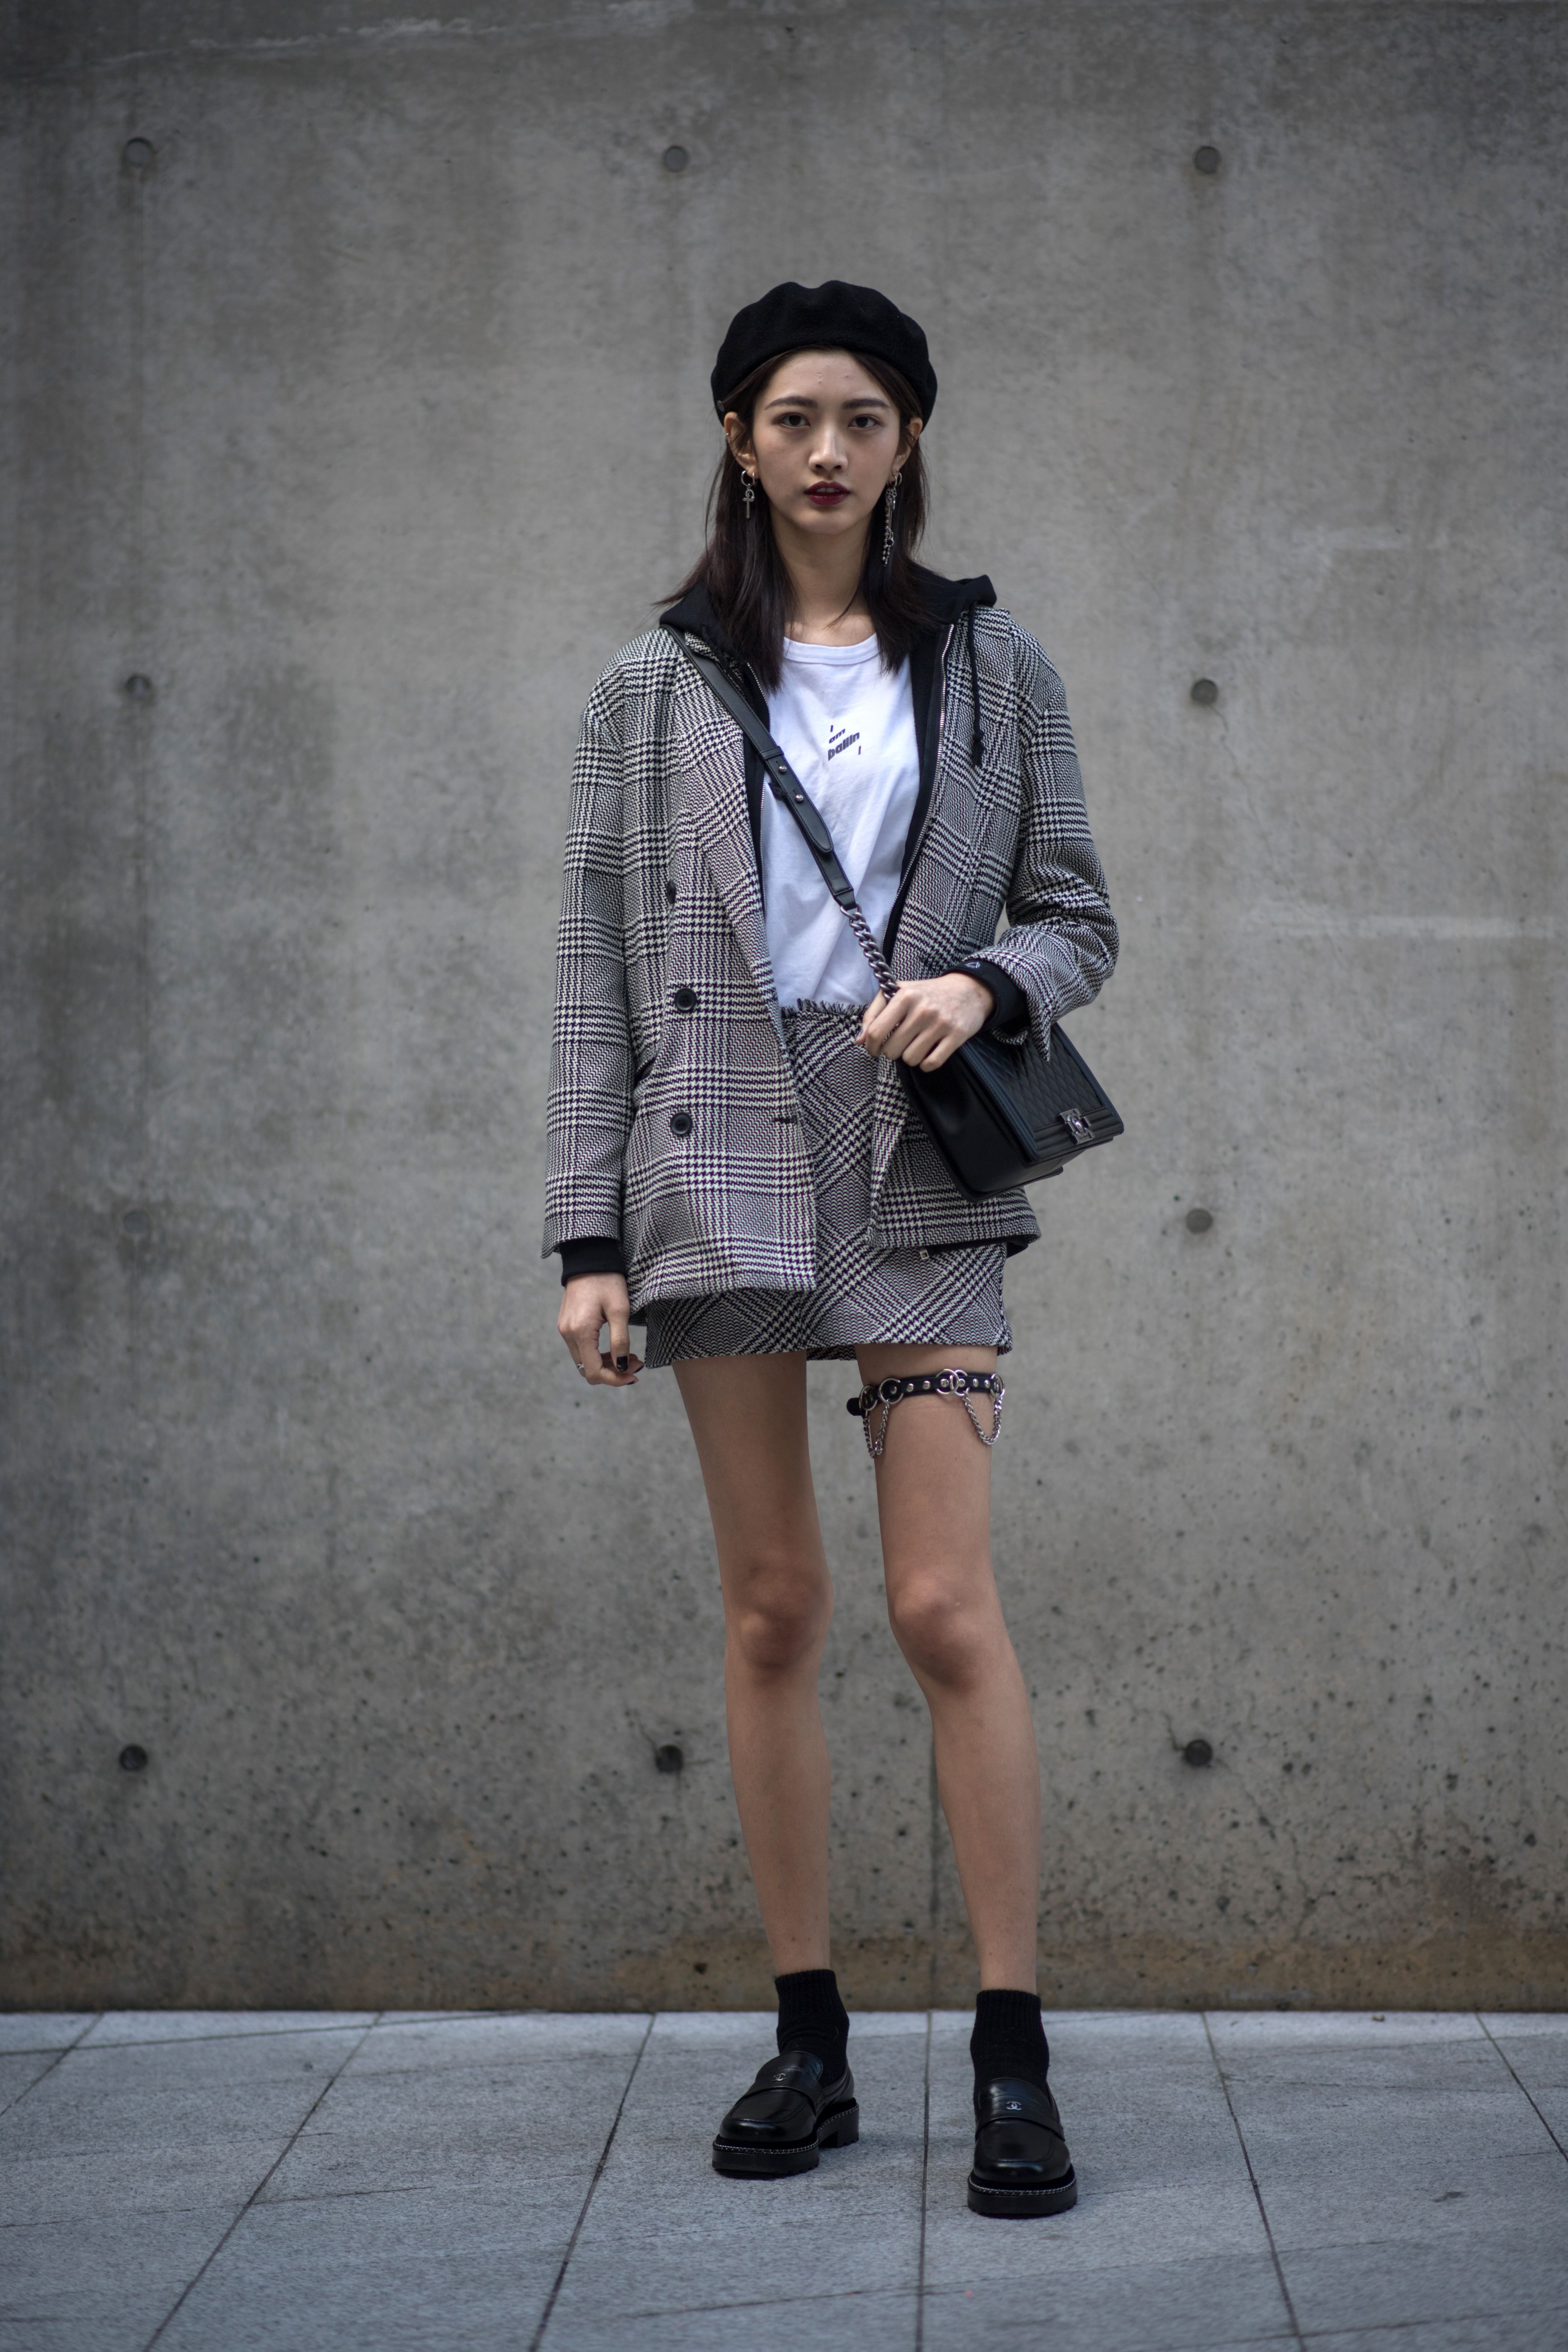 Seoul Fashion Week Street Style is how you'll want to dress this autumn